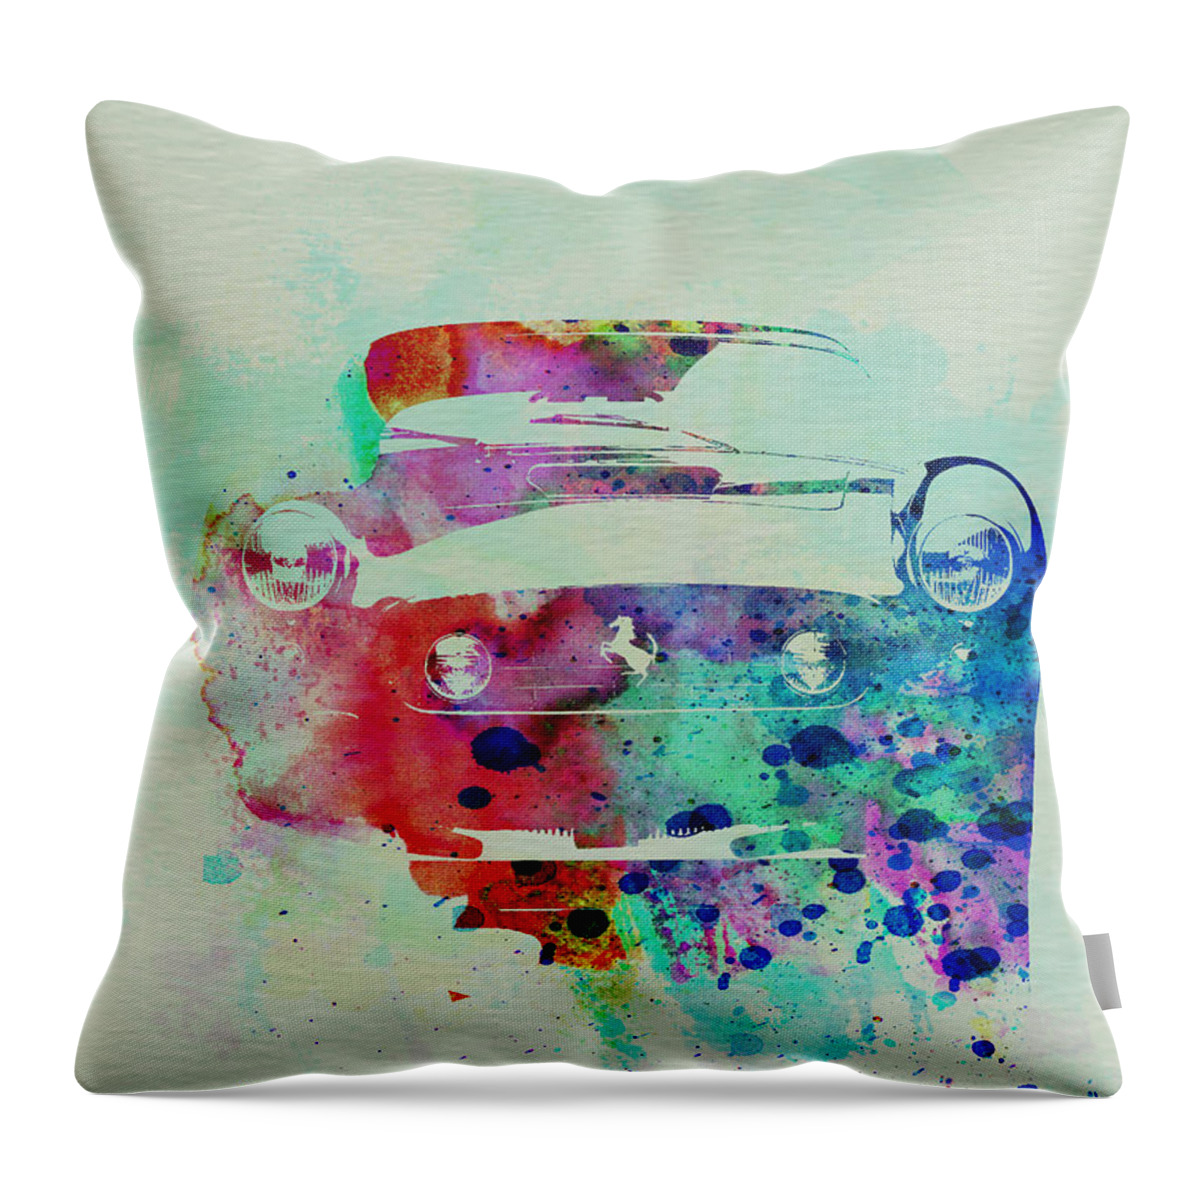 Ferrari Throw Pillow featuring the painting Ferrari Front Watercolor by Naxart Studio